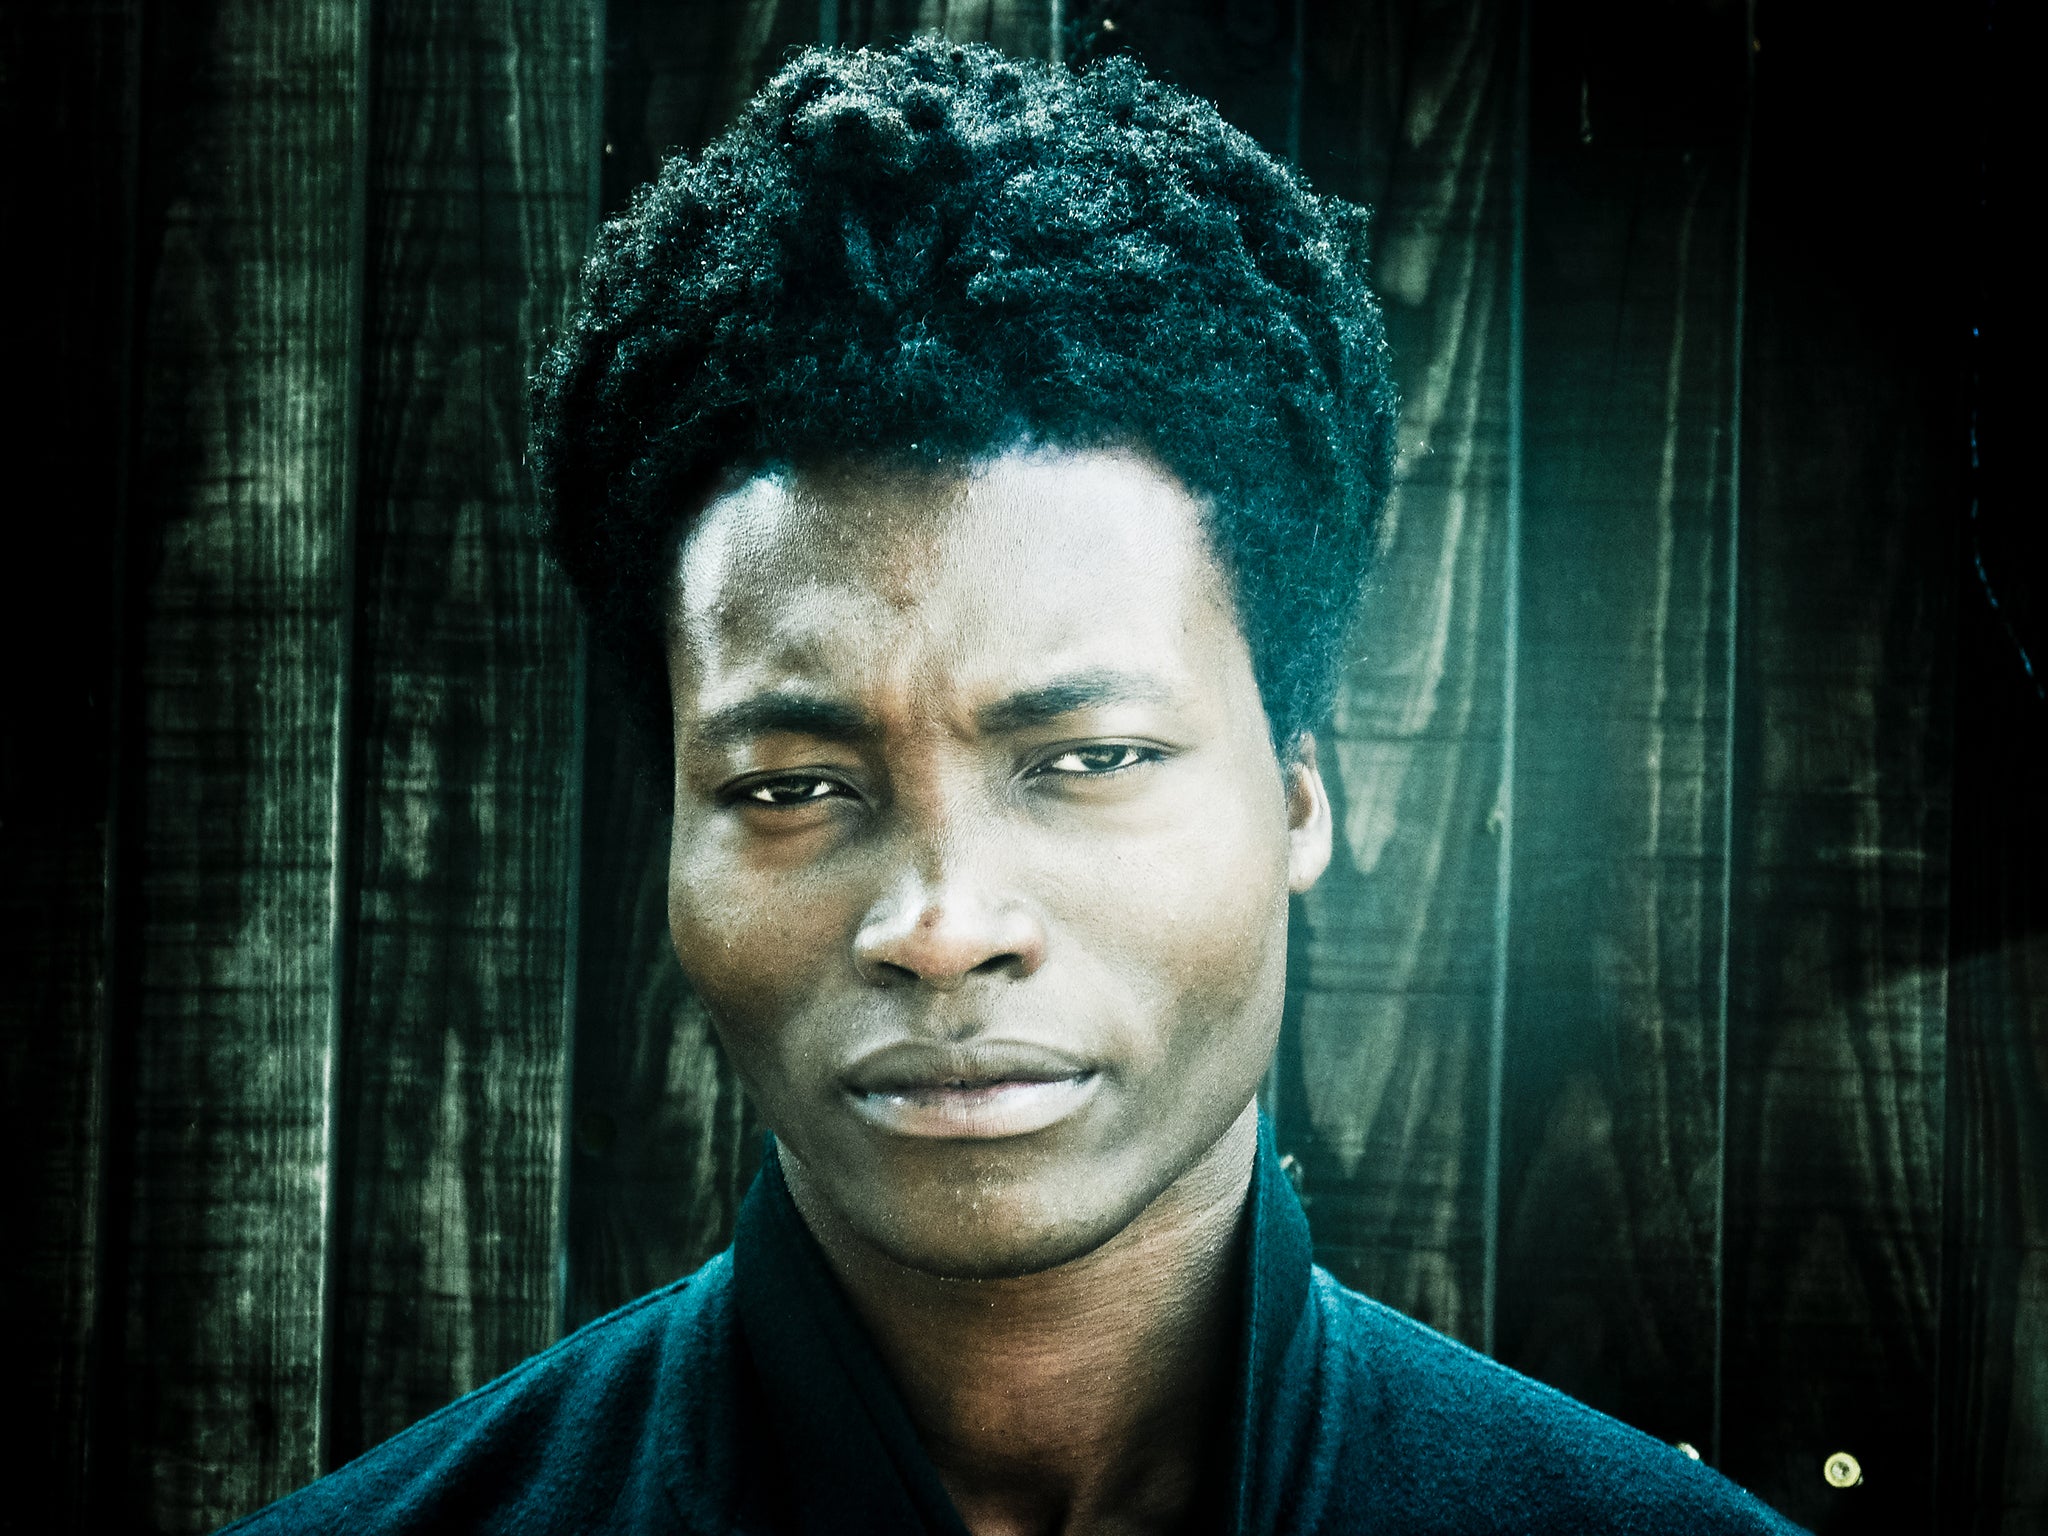 London-born, Paris-dwelling Benjamin Clementine possesses a voice with the richness of Nina Simone